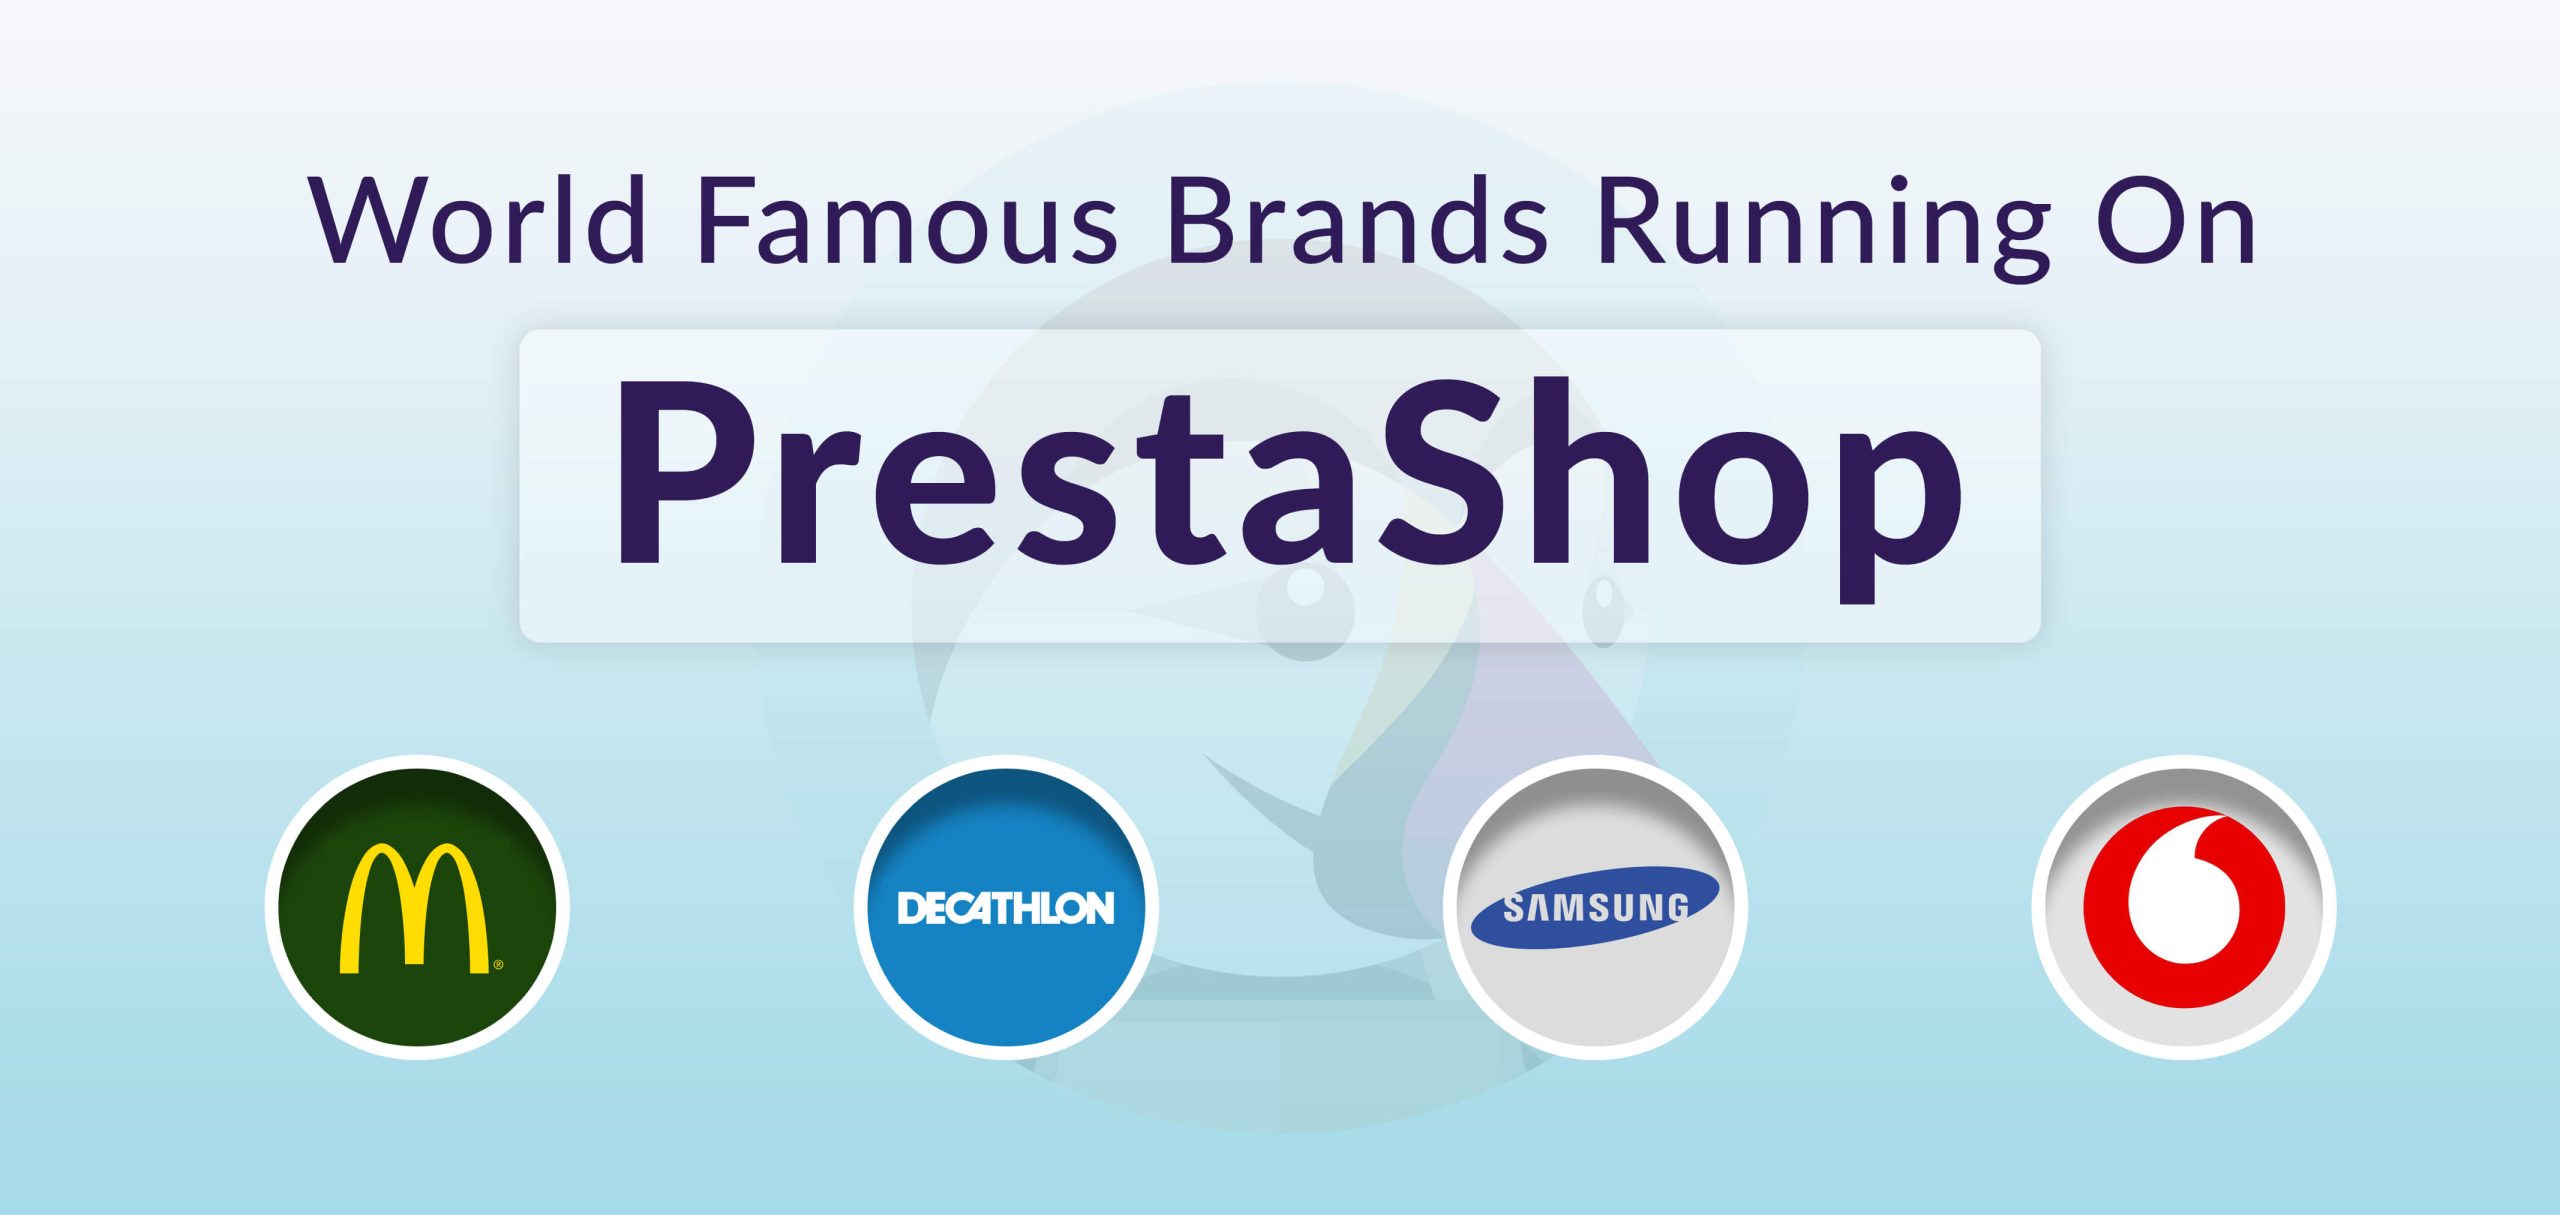 Why are world-famous brands running on PrestaShop?